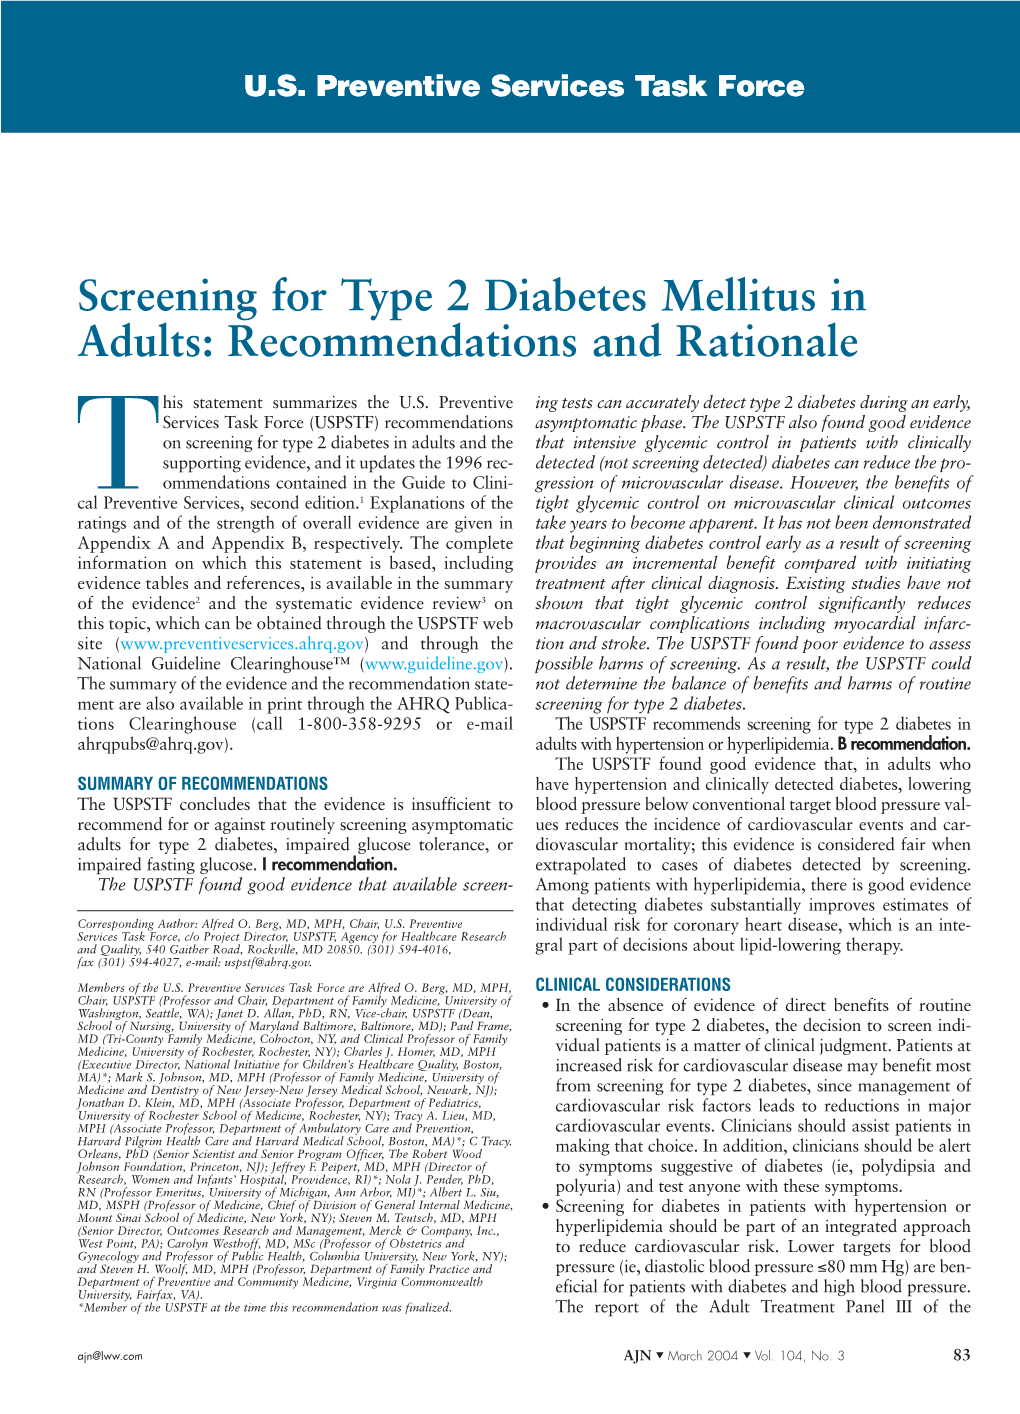 Screening for Type 2 Diabetes Mellitus in Adults: Recommendations and Rationale